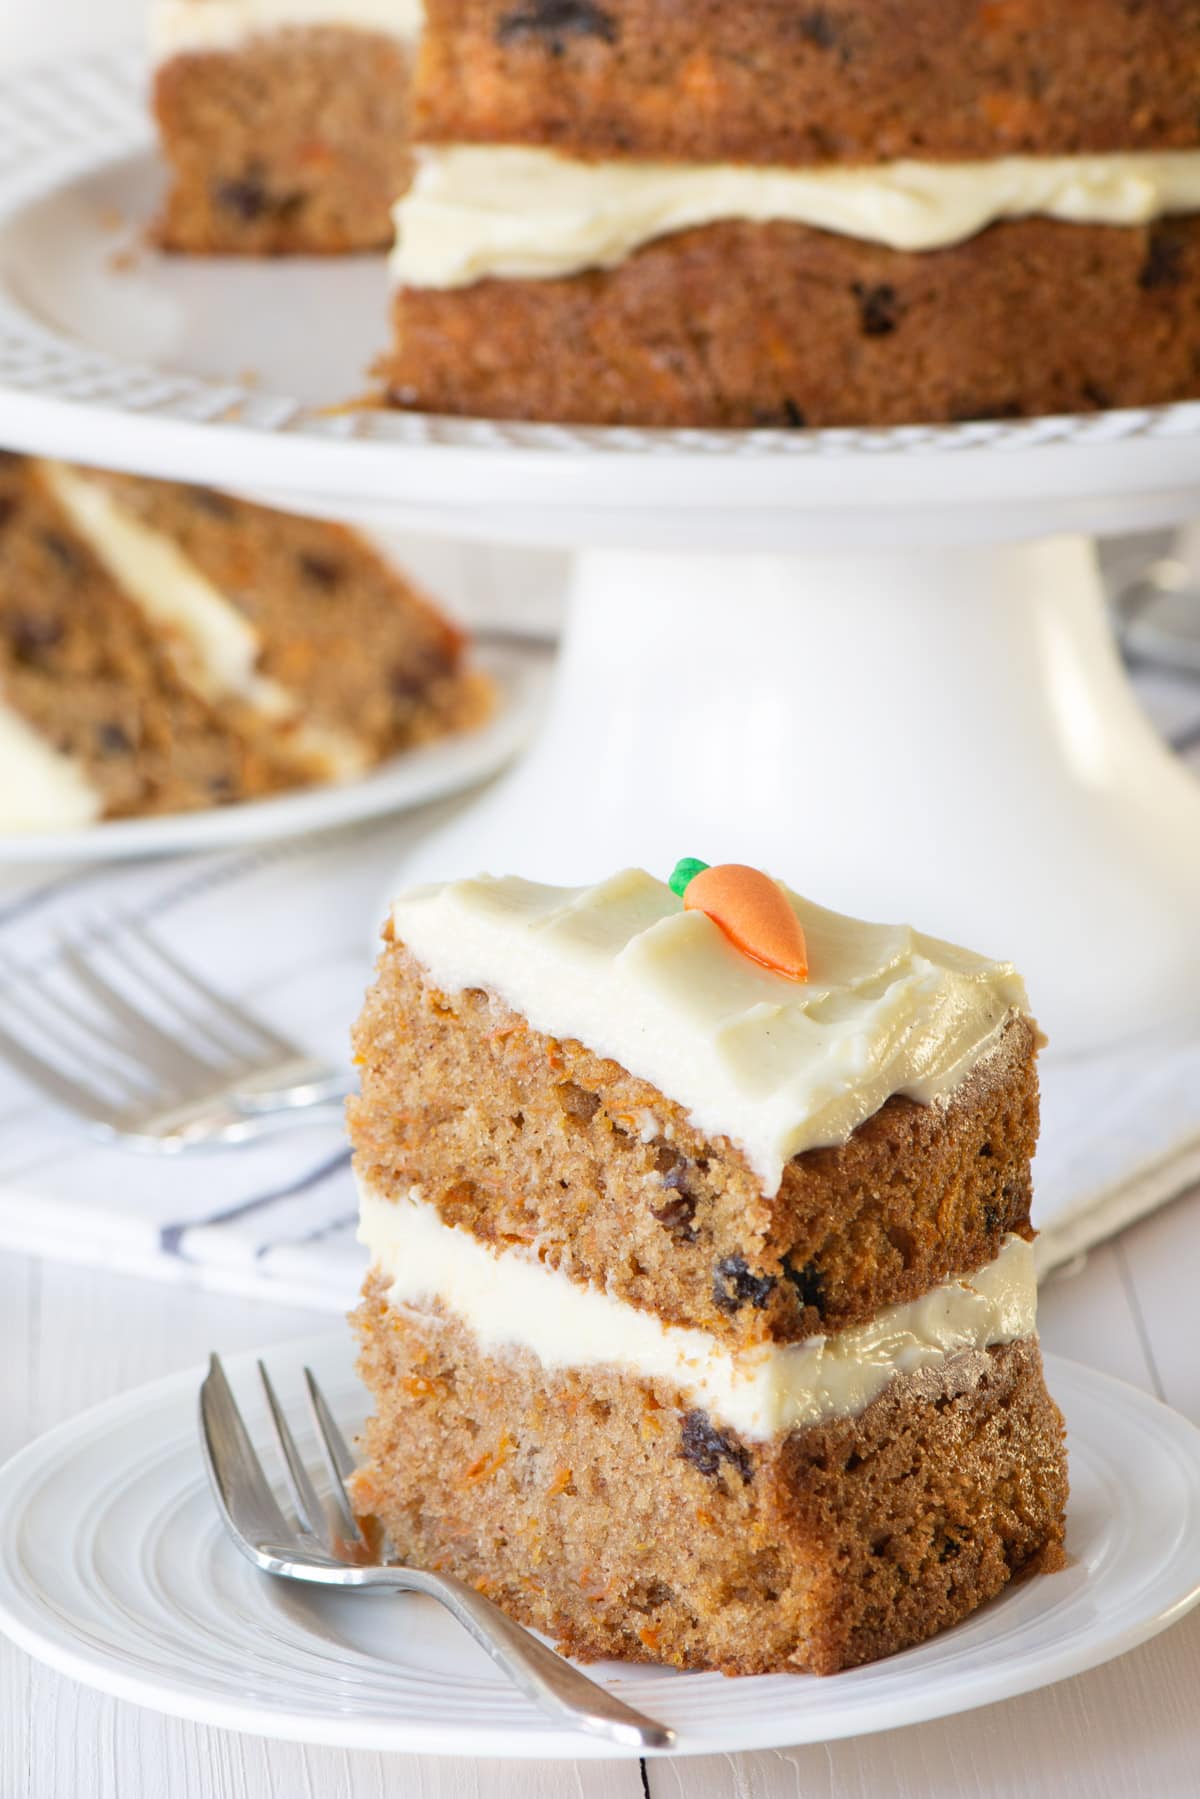 Best Carrot Cake Recipe - Cooking Classy